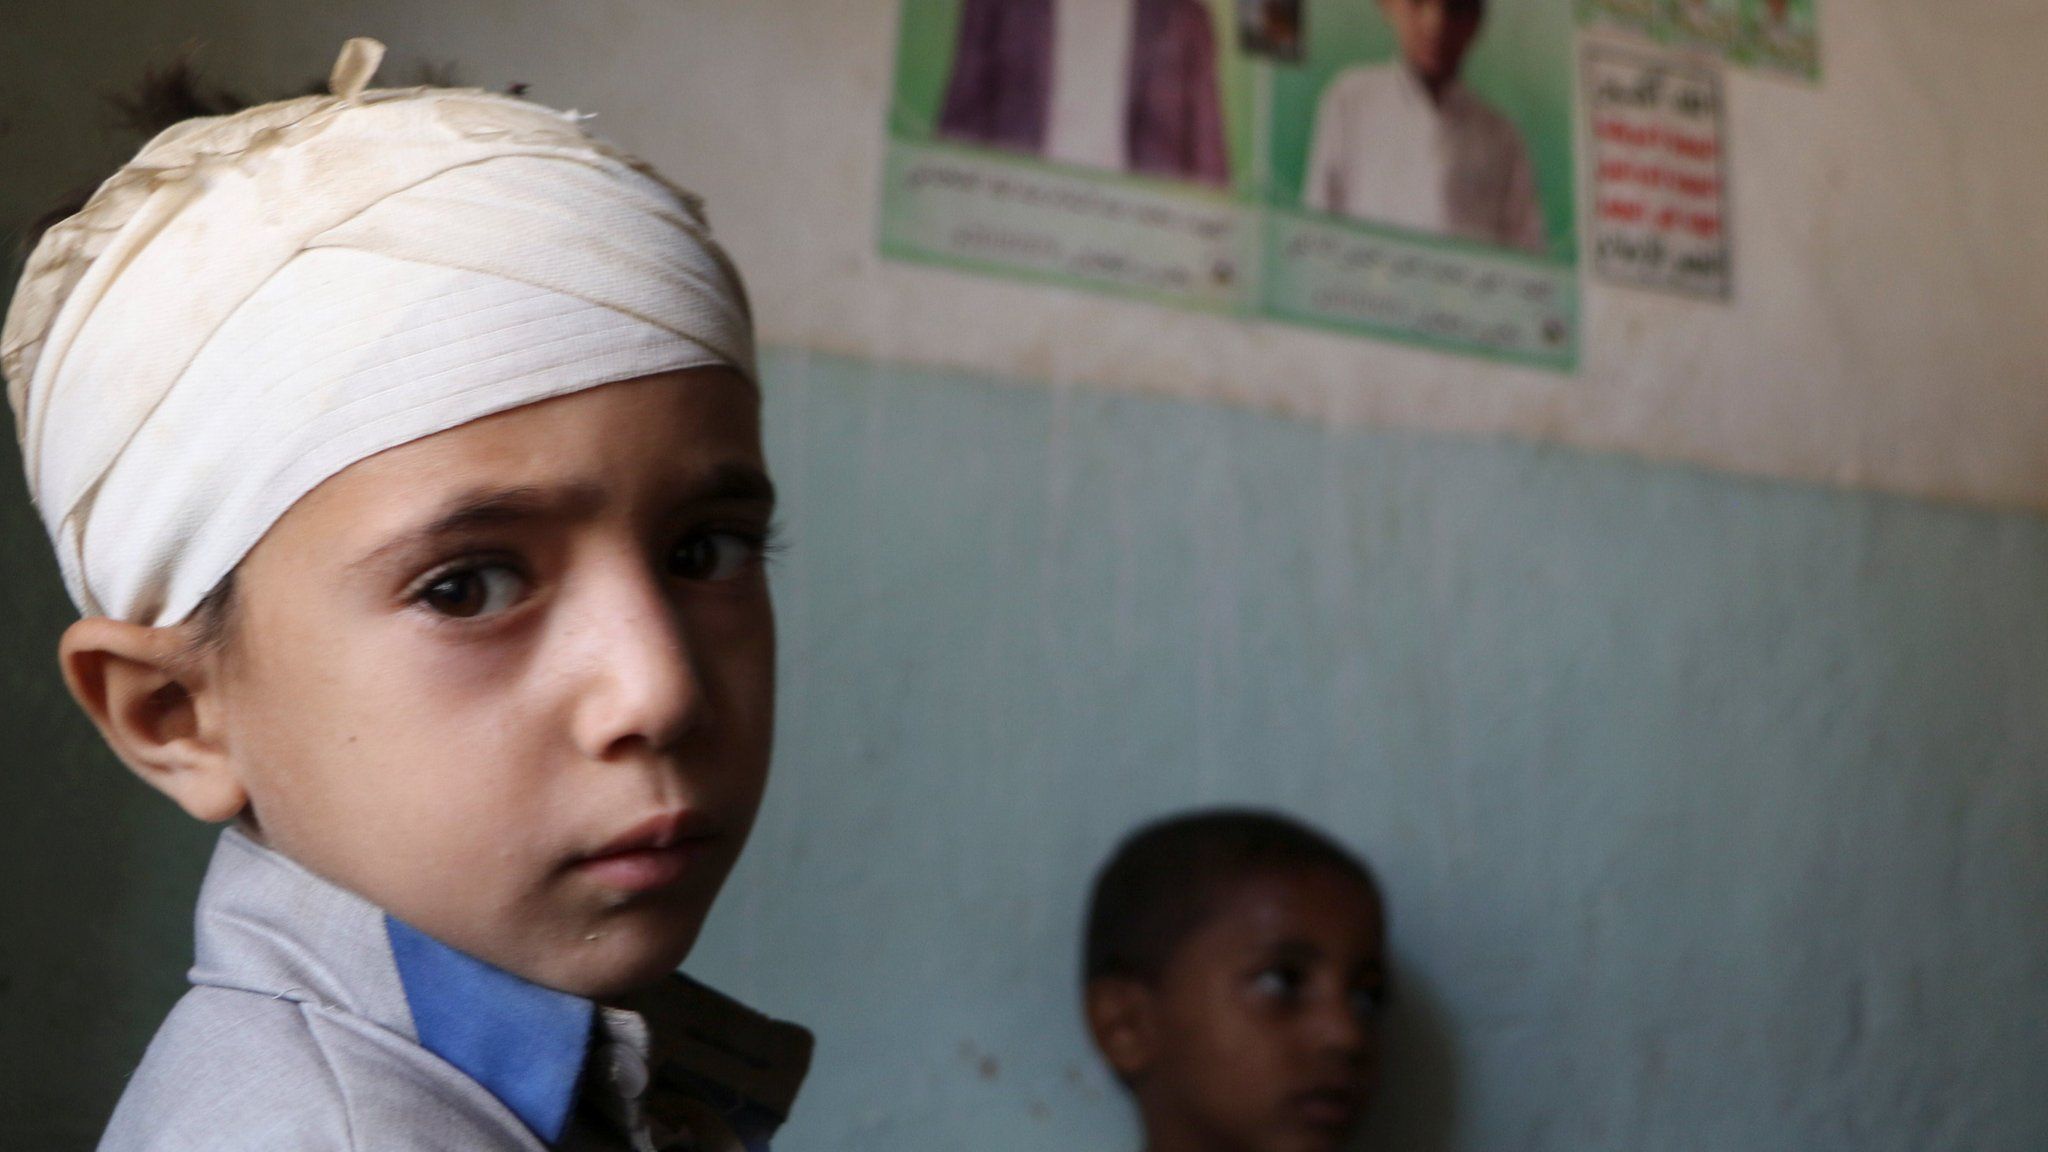 A boy injured in a Saudi-led coalition air strike on a bus in rebel-held Yemen stands next to posters of other boys who were killed (4 September 2018)